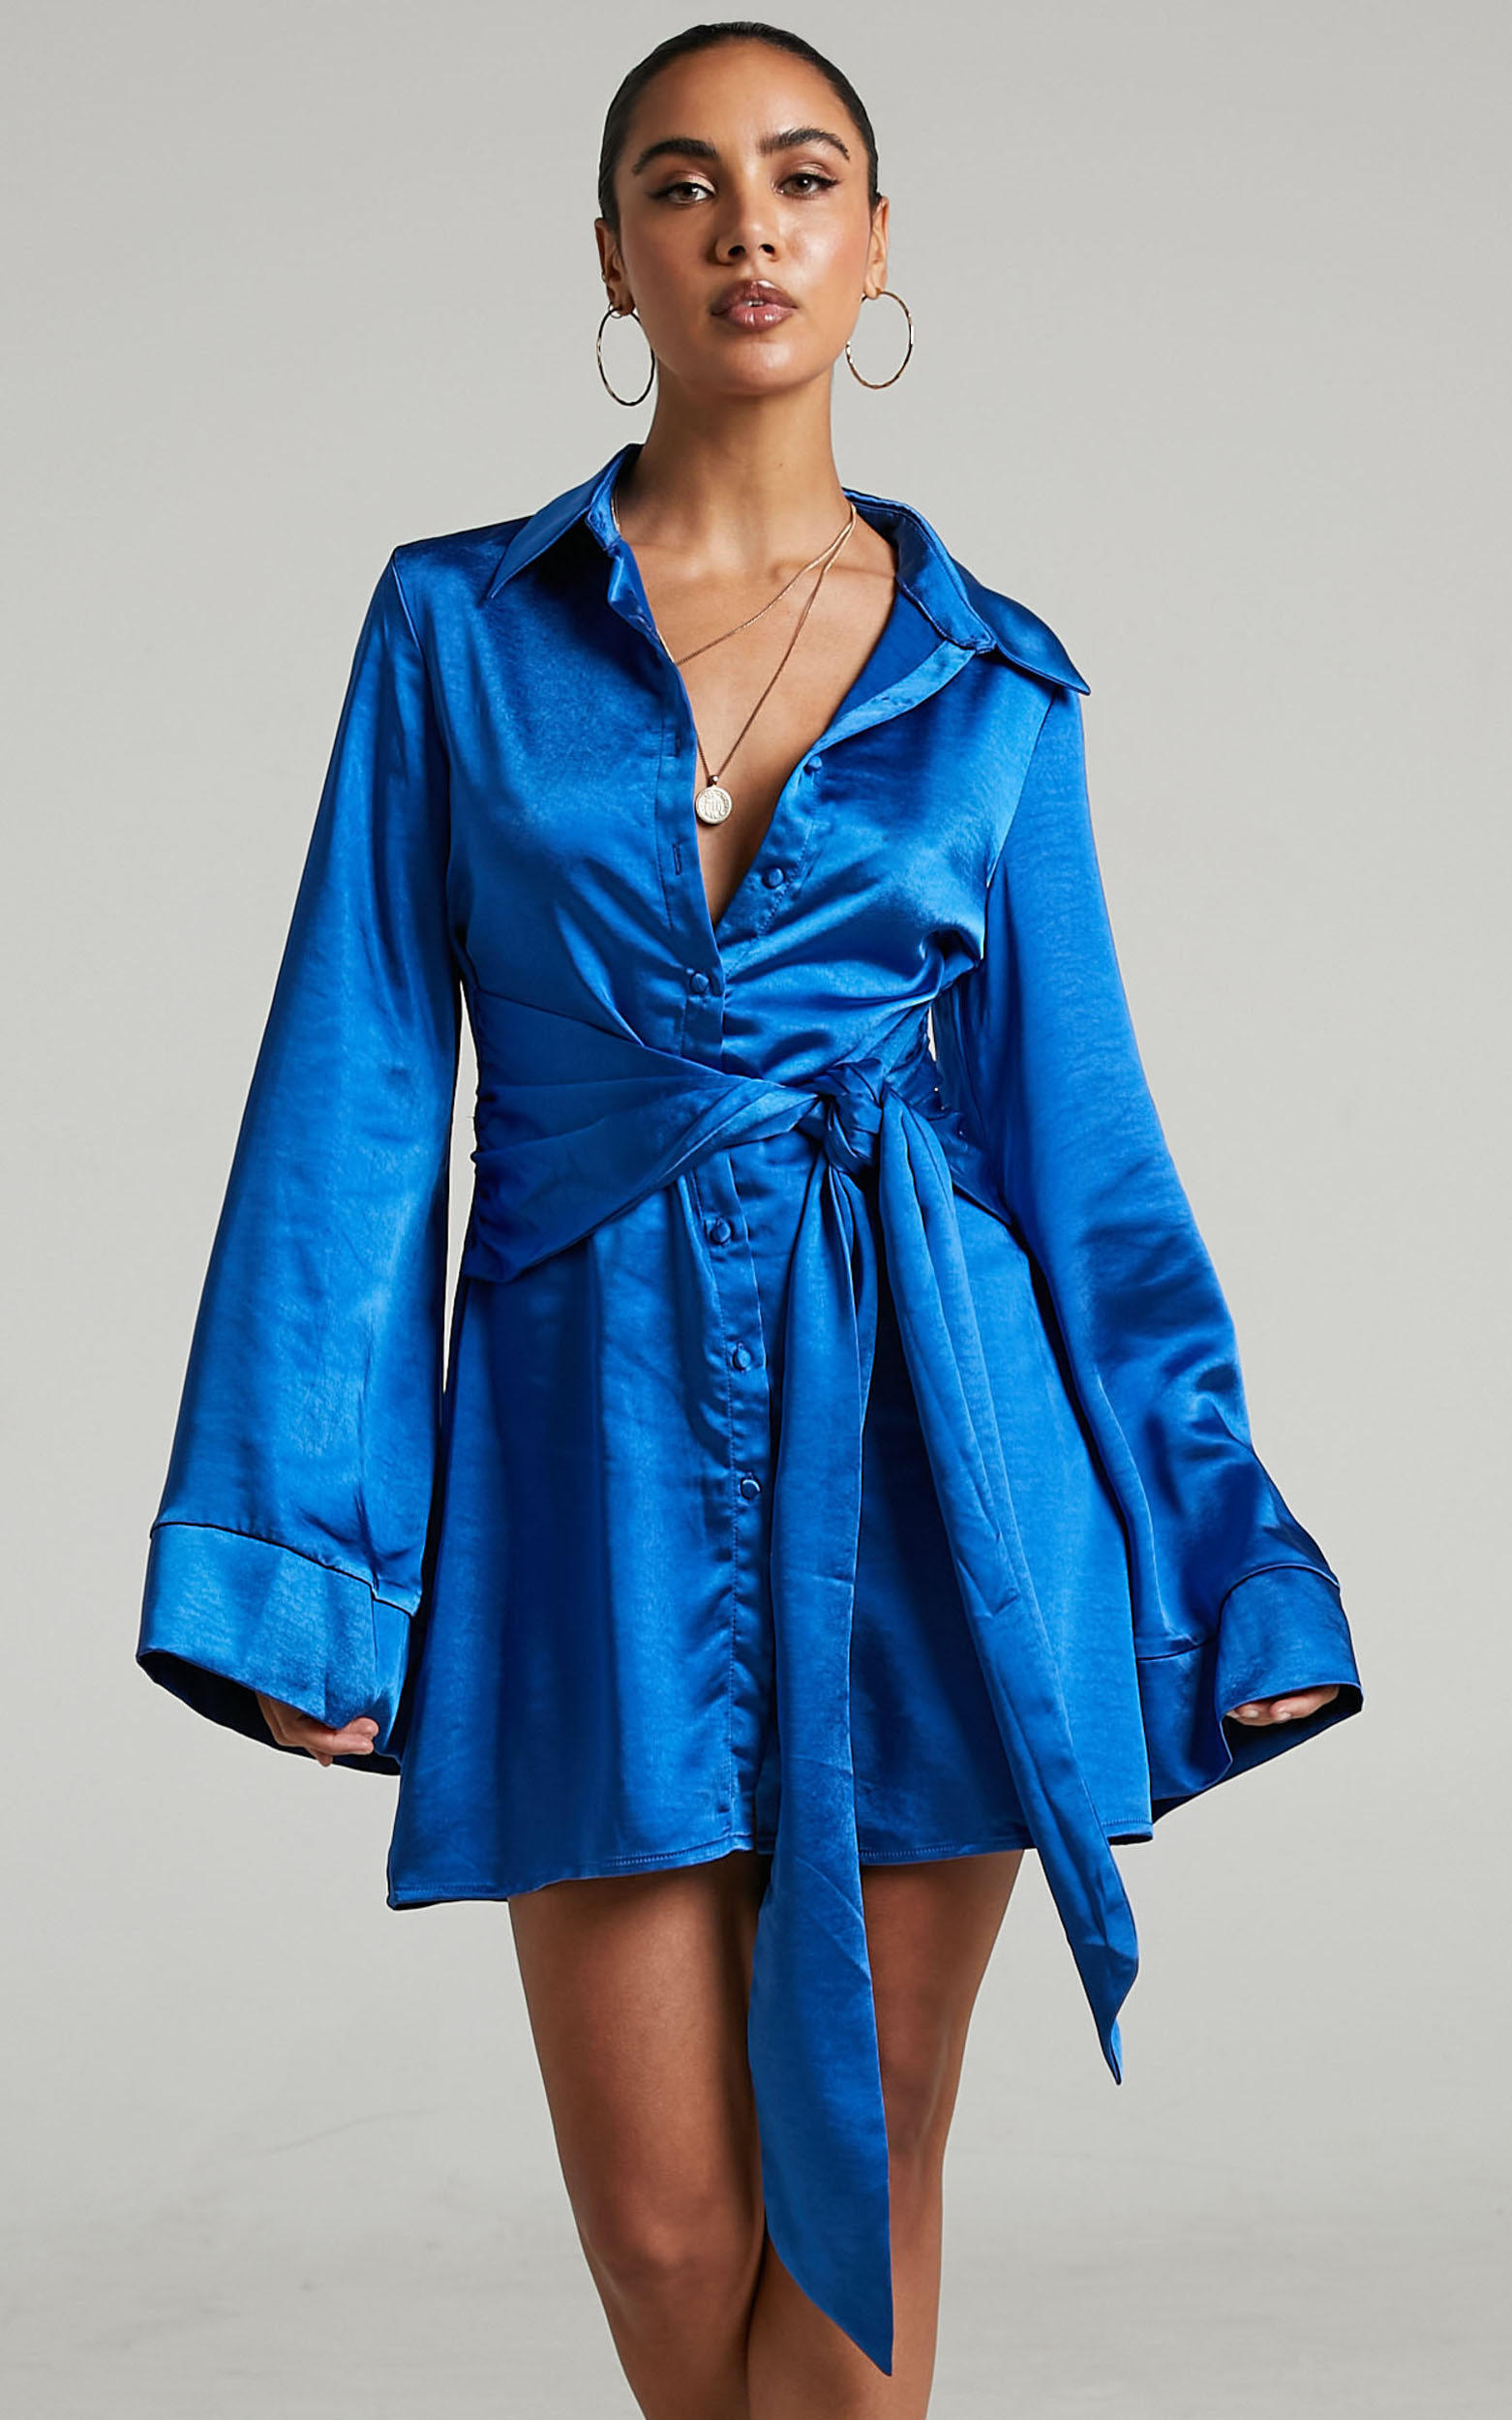 Hadid Button Down Waist Tie Shirt Dress in Electric Blue - 06, BLU2, hi-res image number null